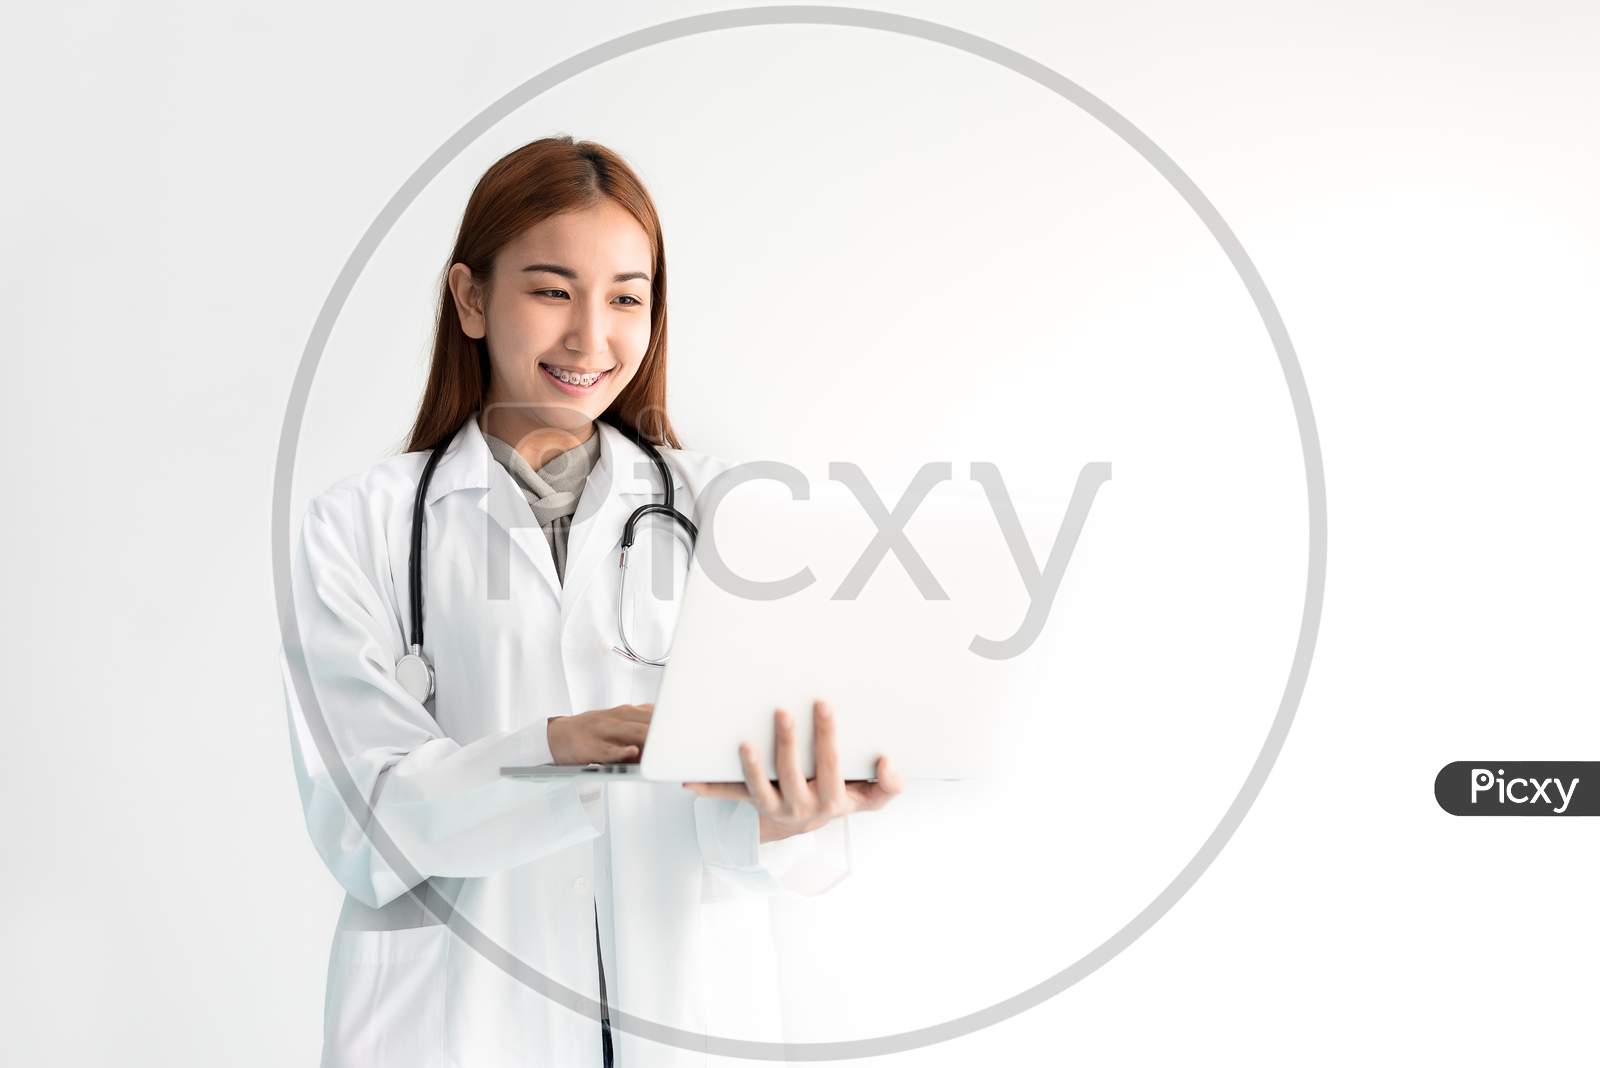 Female Doctor Using Laptop With Stethoscope On White Background. Medical And Healthcare Concept. People And Technology Theme